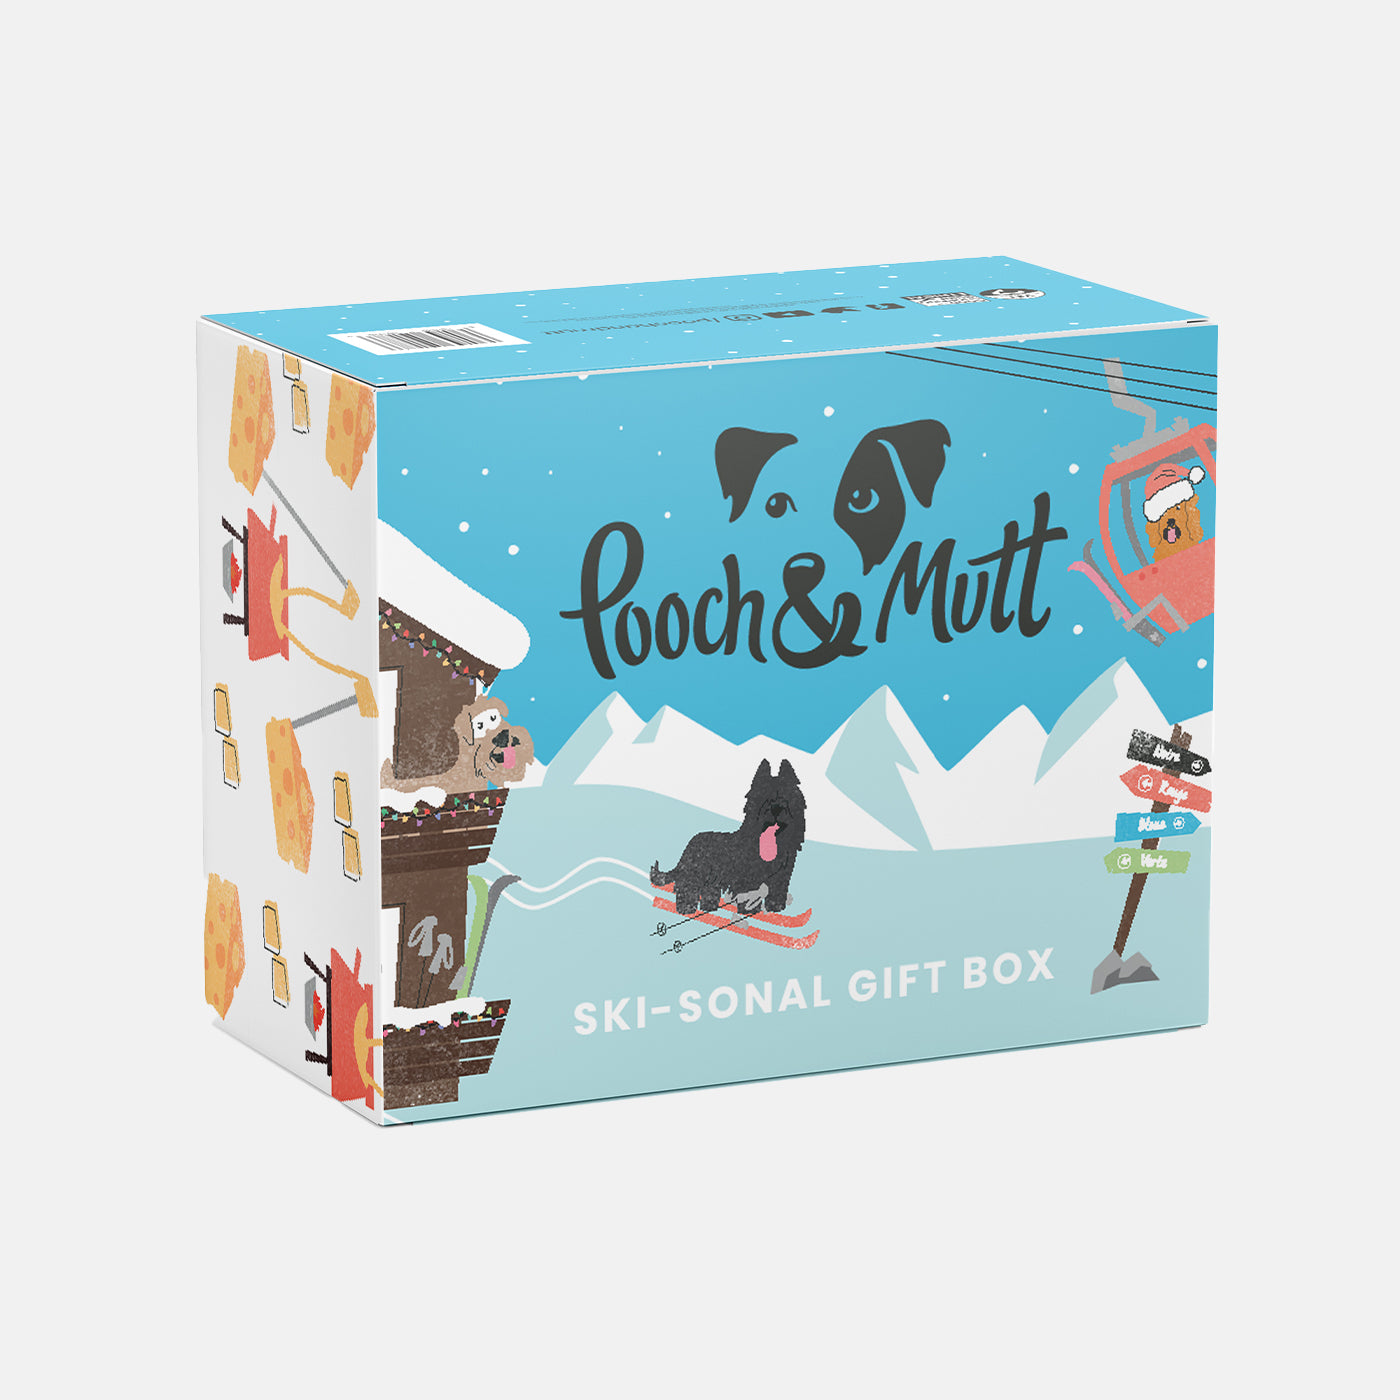 Pooch & Mutt Skisonal Christmas Gift Box For Dogs, Available Now at Lords & Labradors